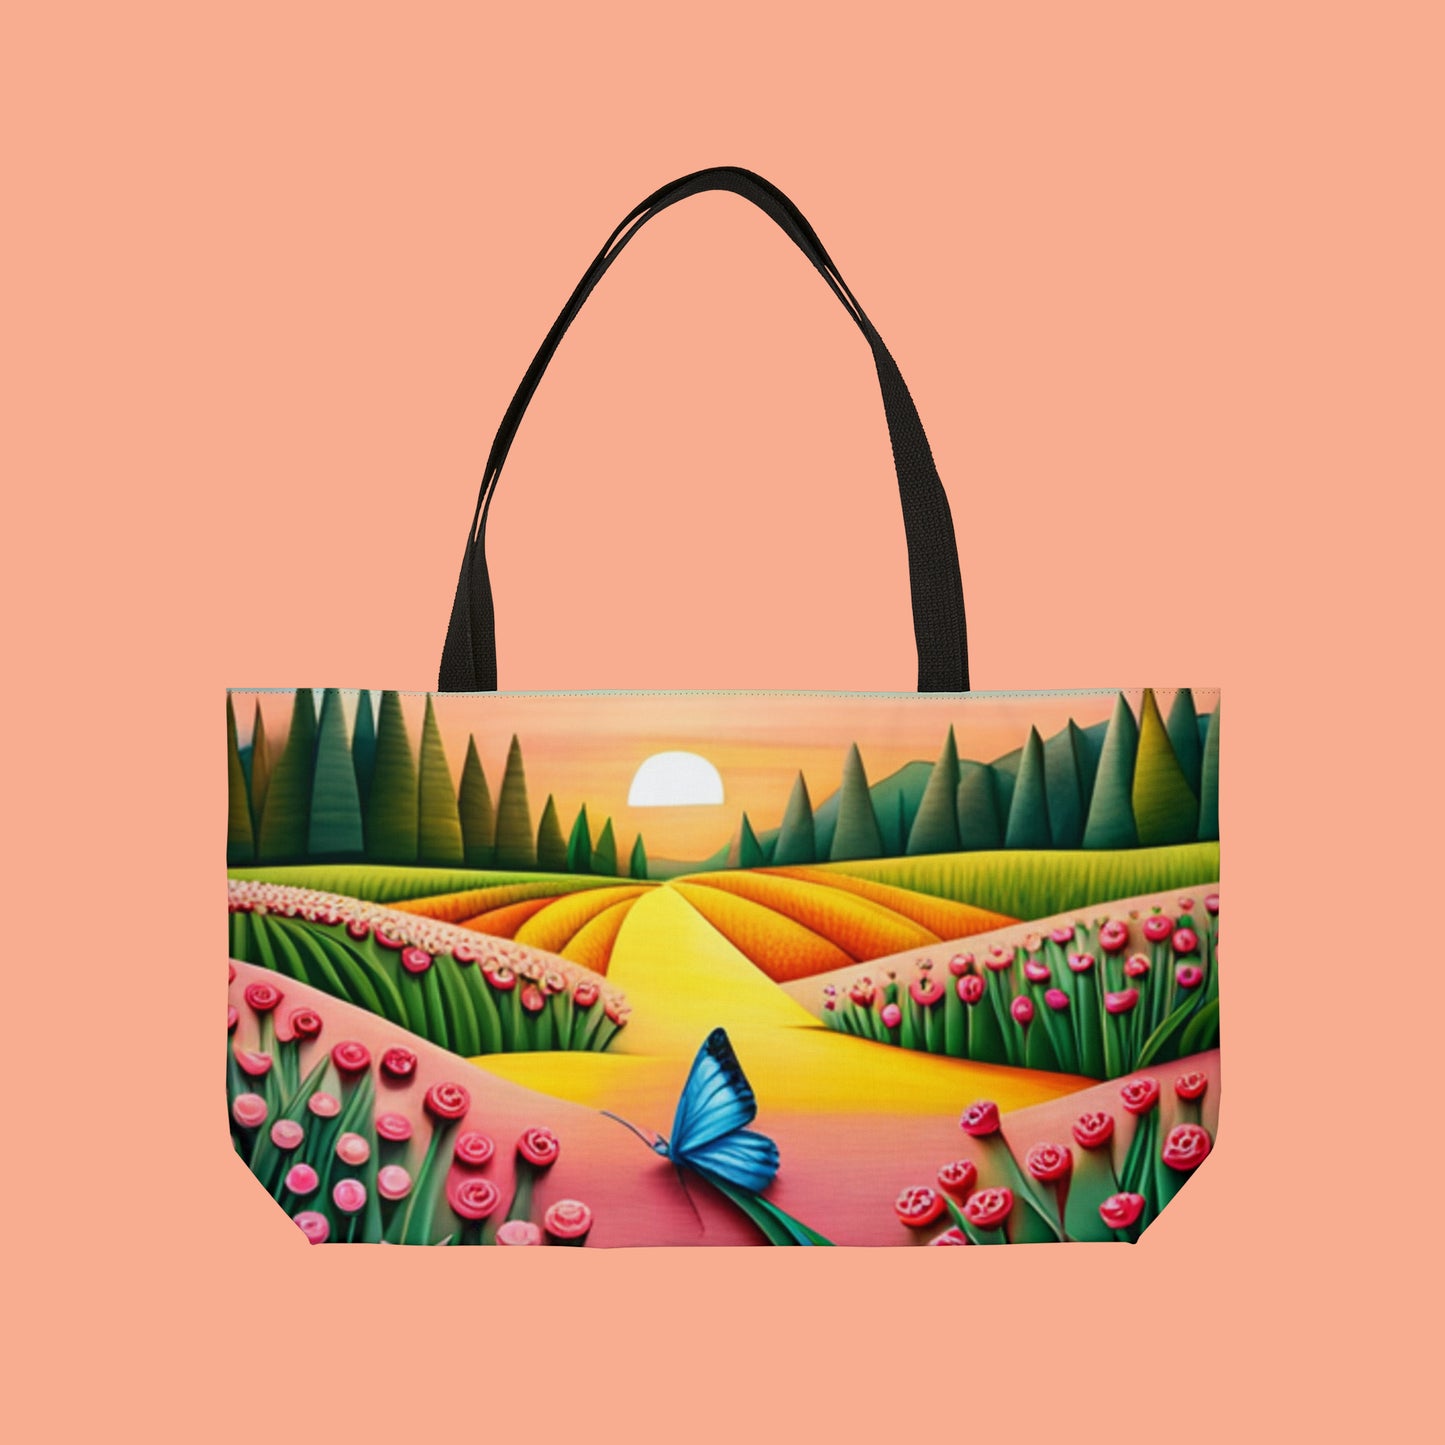 Blue butterfly in the middle of a field of flowers inspired this origami style design Weekender Tote Bag.